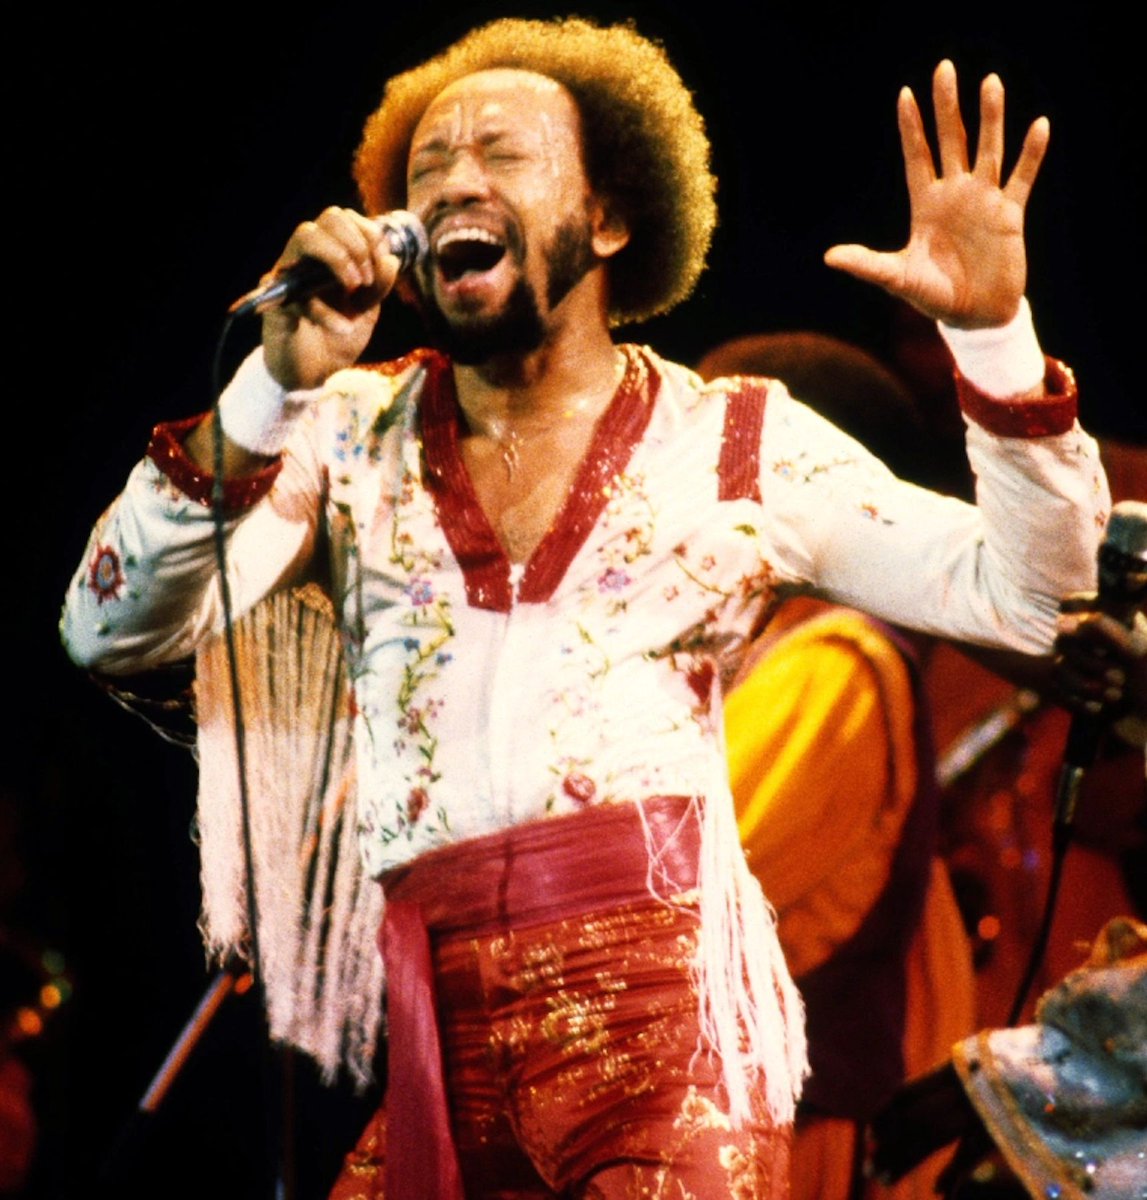 Happy birthday, legend.
You are missed.
#MauriceWhite forever!

💛💛💛